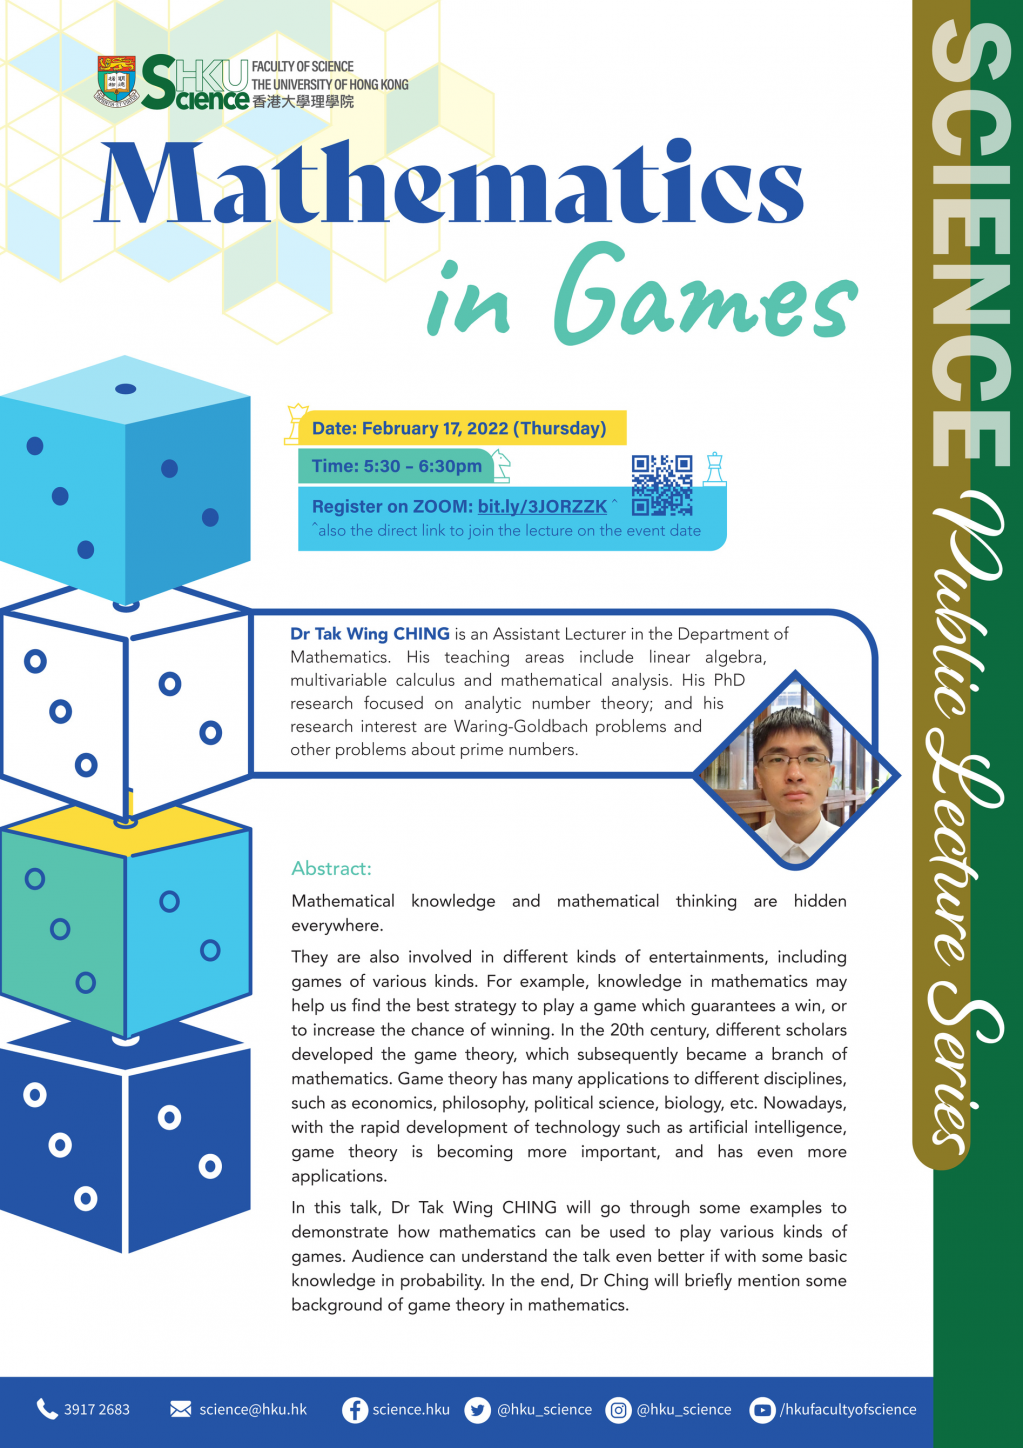 HKU Science Public Lecture Series - Mathematics in Games (Feb 17, 2022)